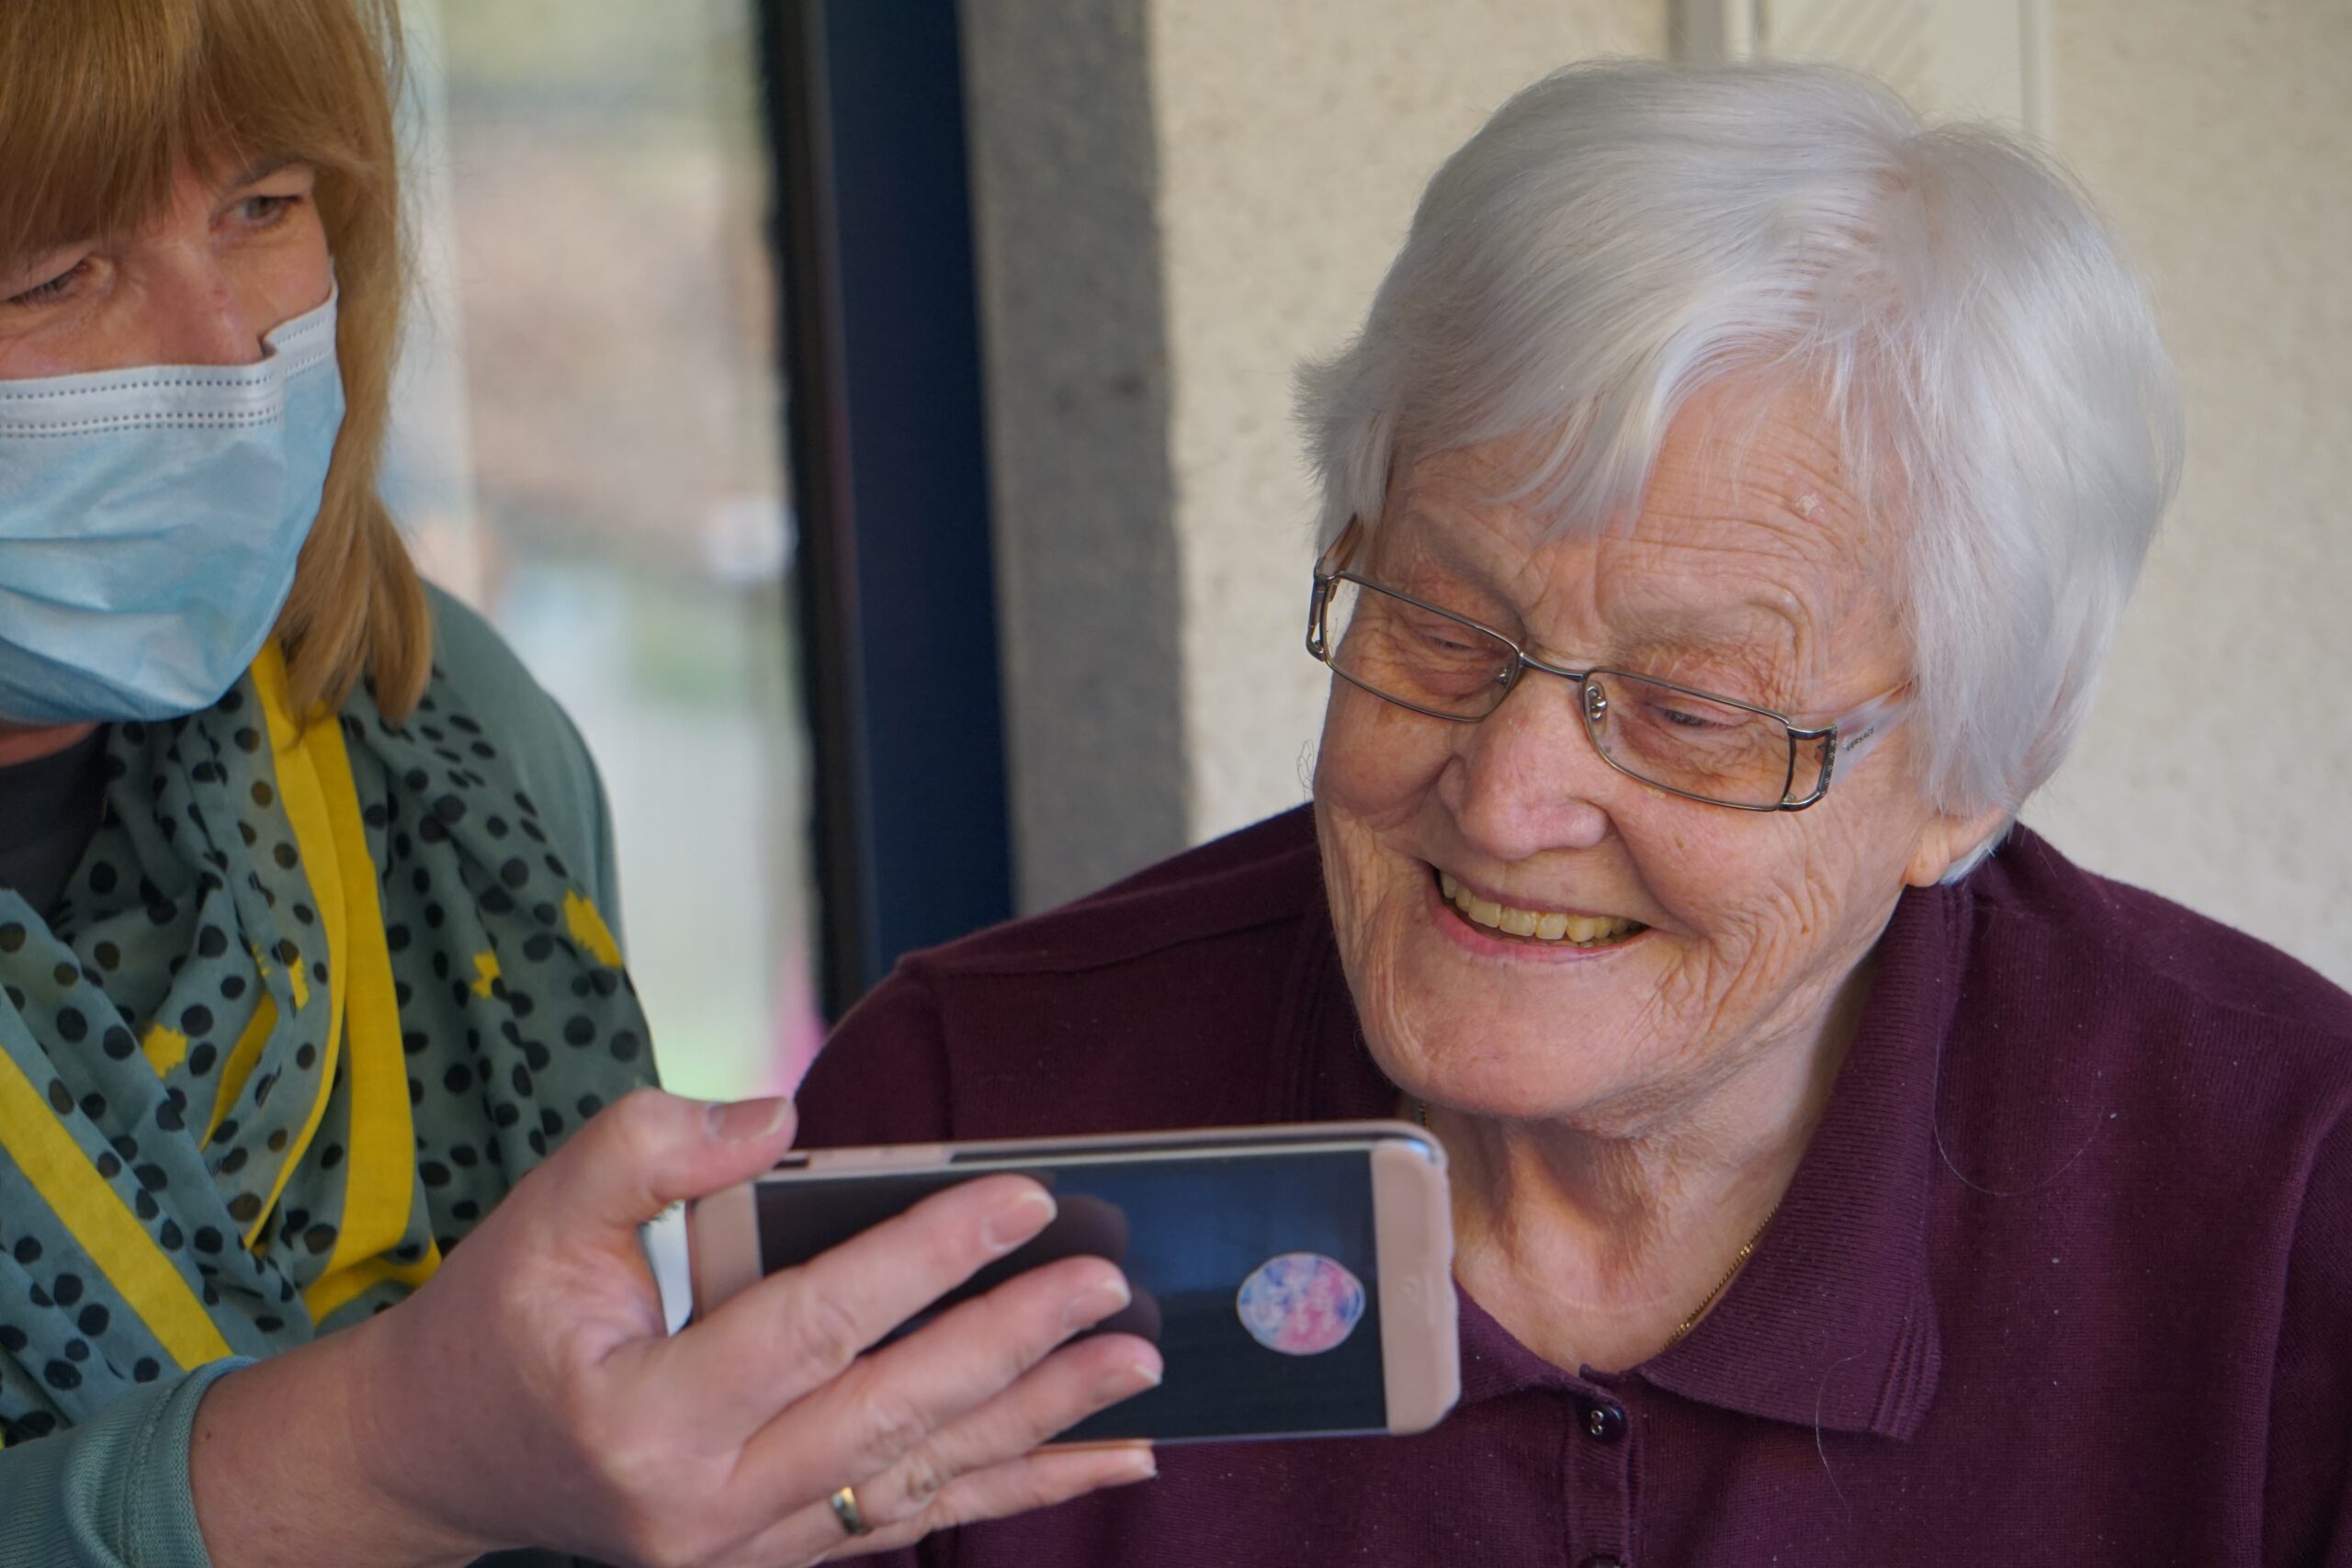 An image of an older lady smiling whilst looking at something on another lady's phone